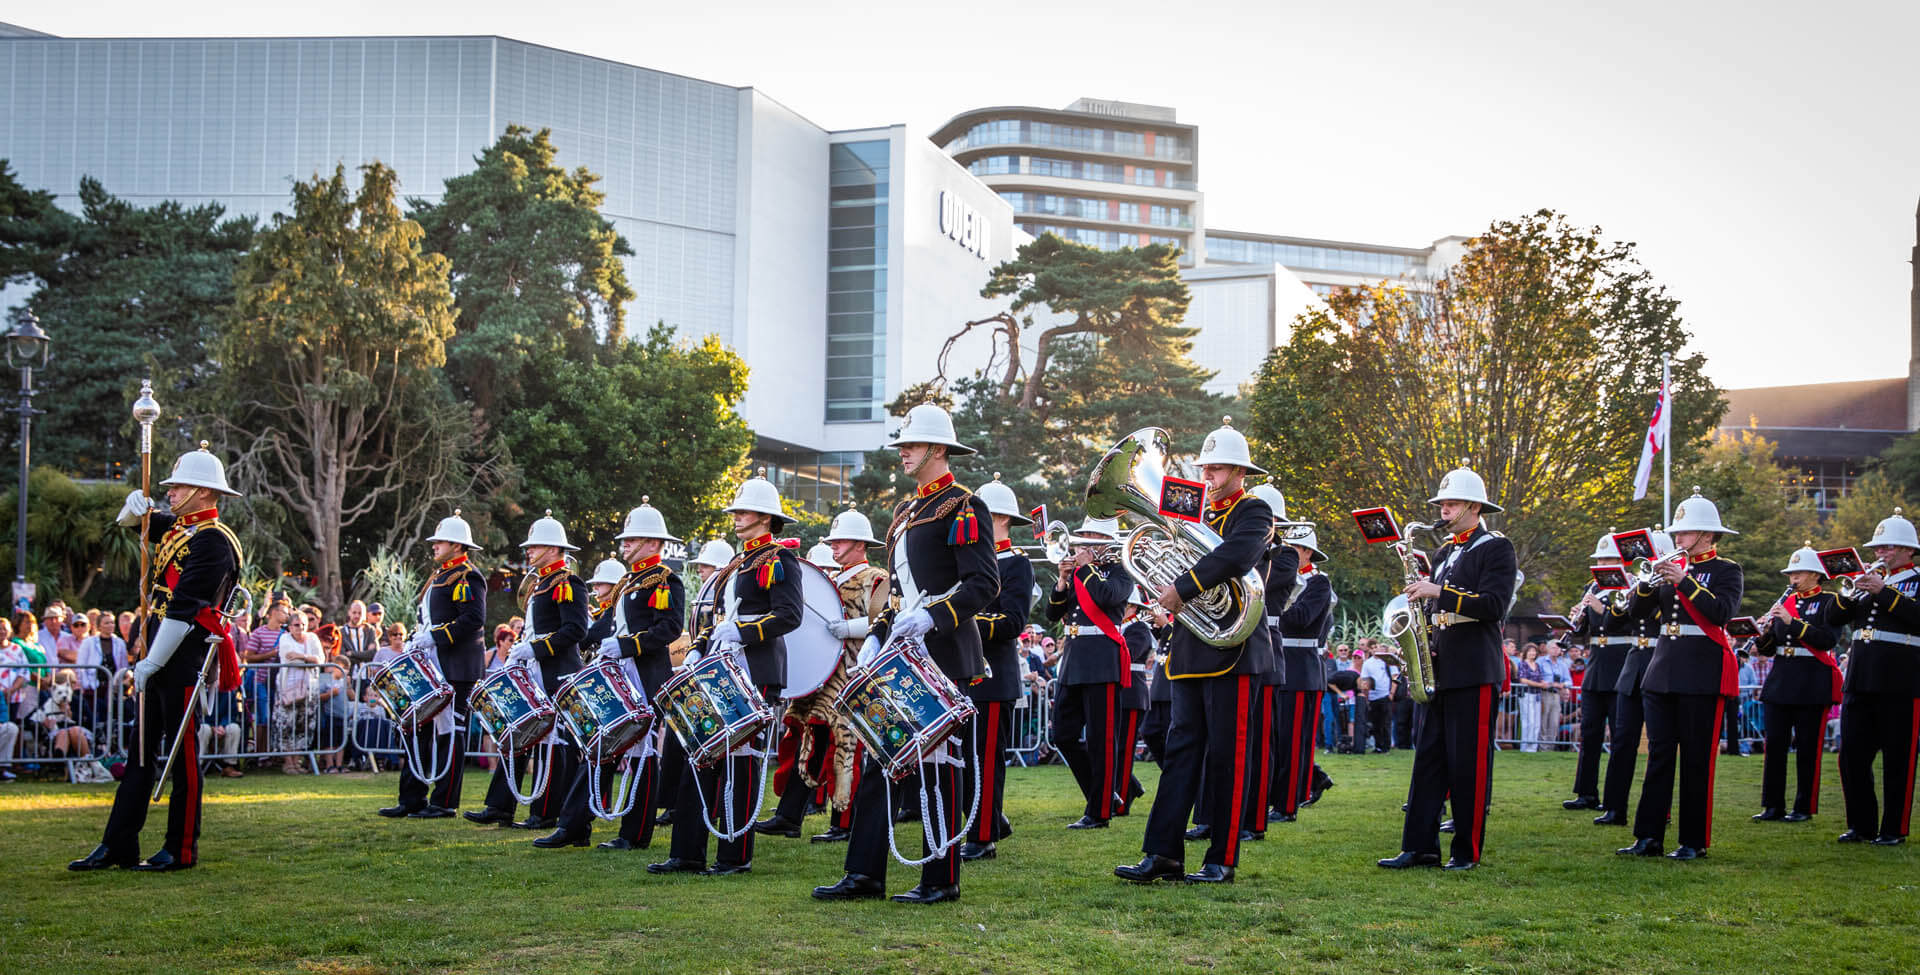 Army band performing in Bournemouth gardens to visitors and onlookers